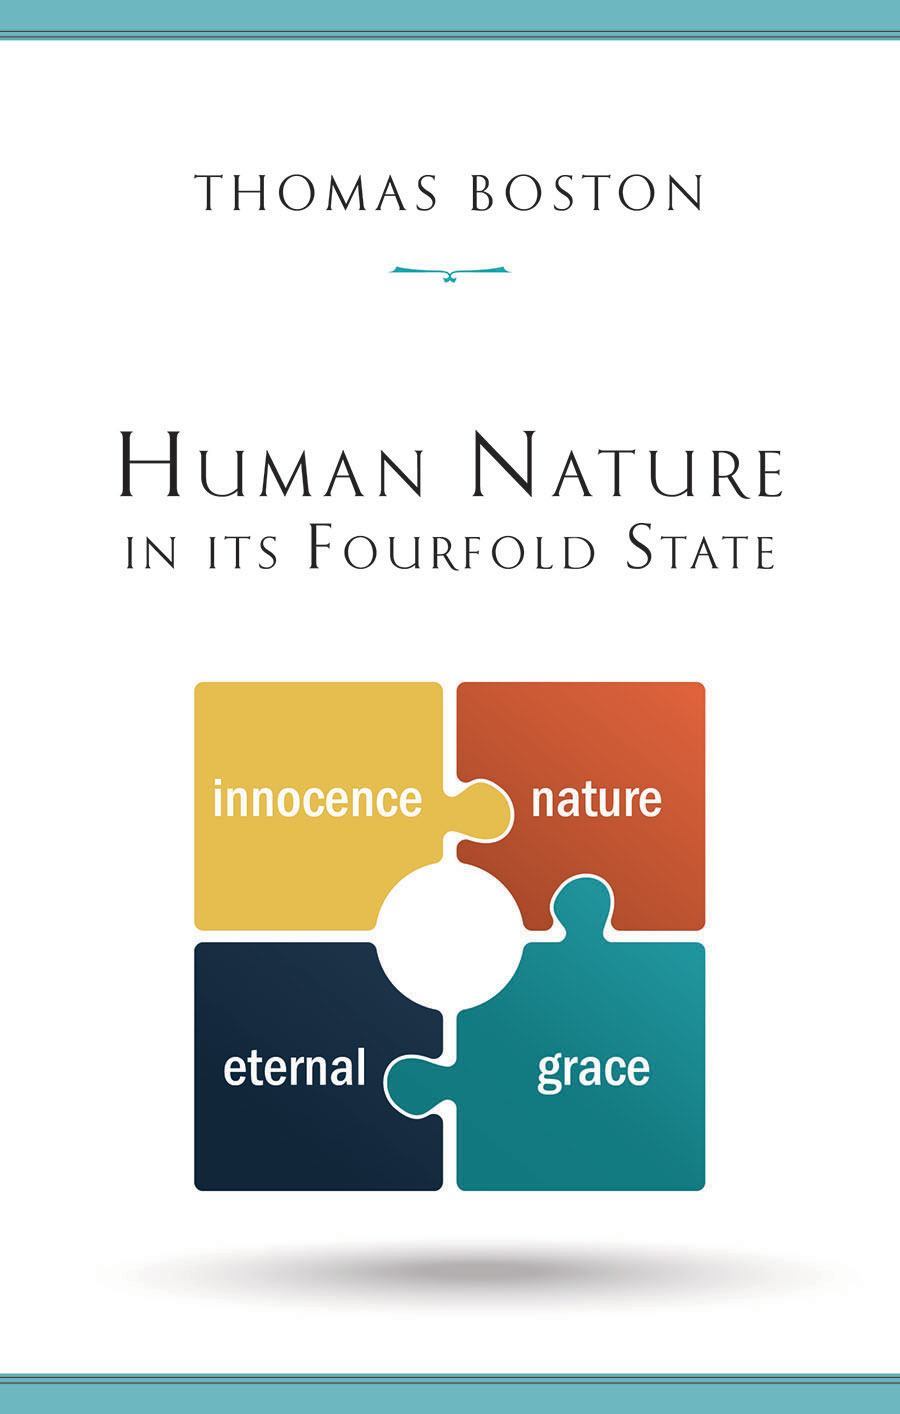 cover image for 'Human Nature in its Fourfold State' by Thomas Boston